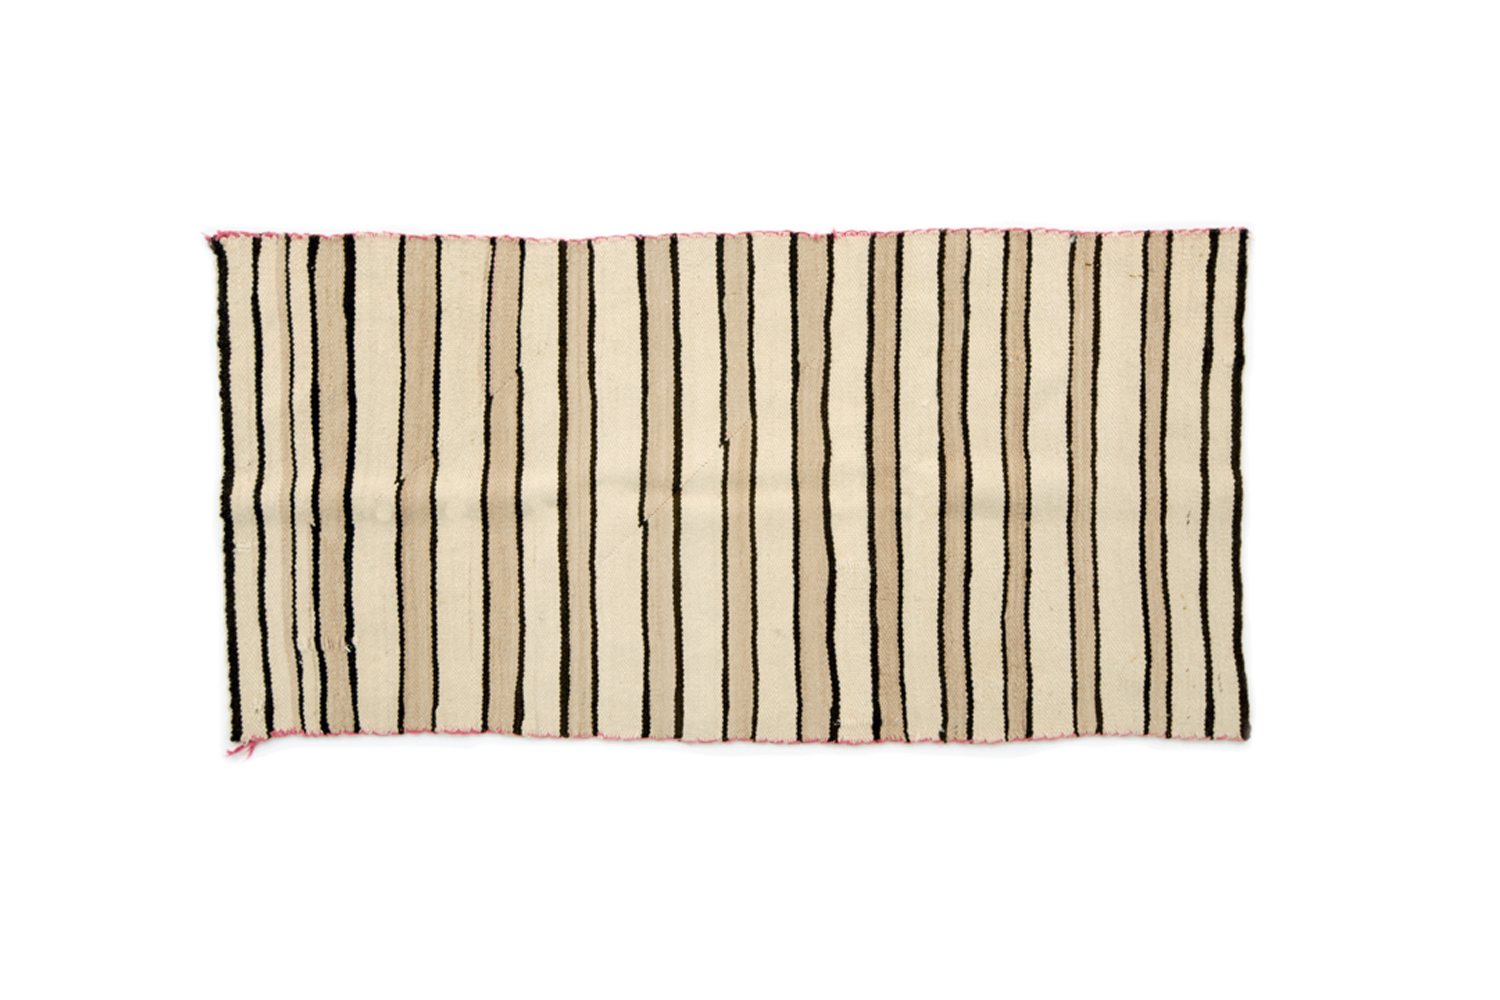 source a similar vintage rug from brooklyn dealer sharktooth such as this 1800 19